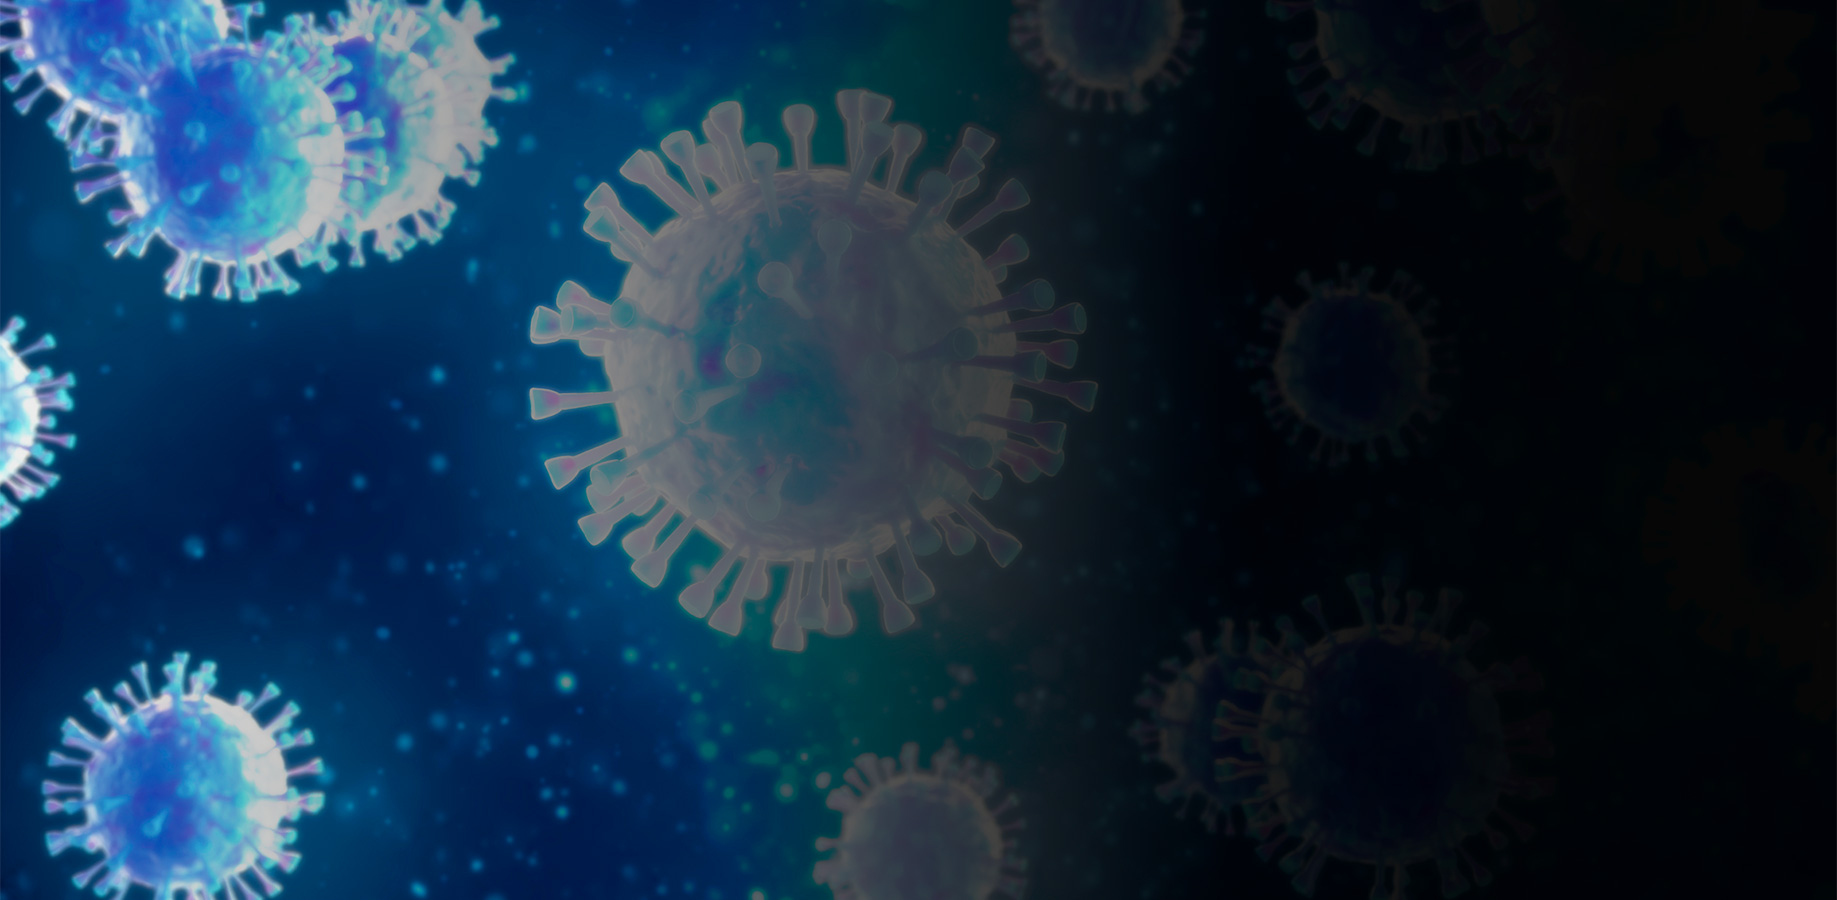 Image of a virus, representing Covid-19, as part of Intersys's pledge to continue IT support during the pandemic.